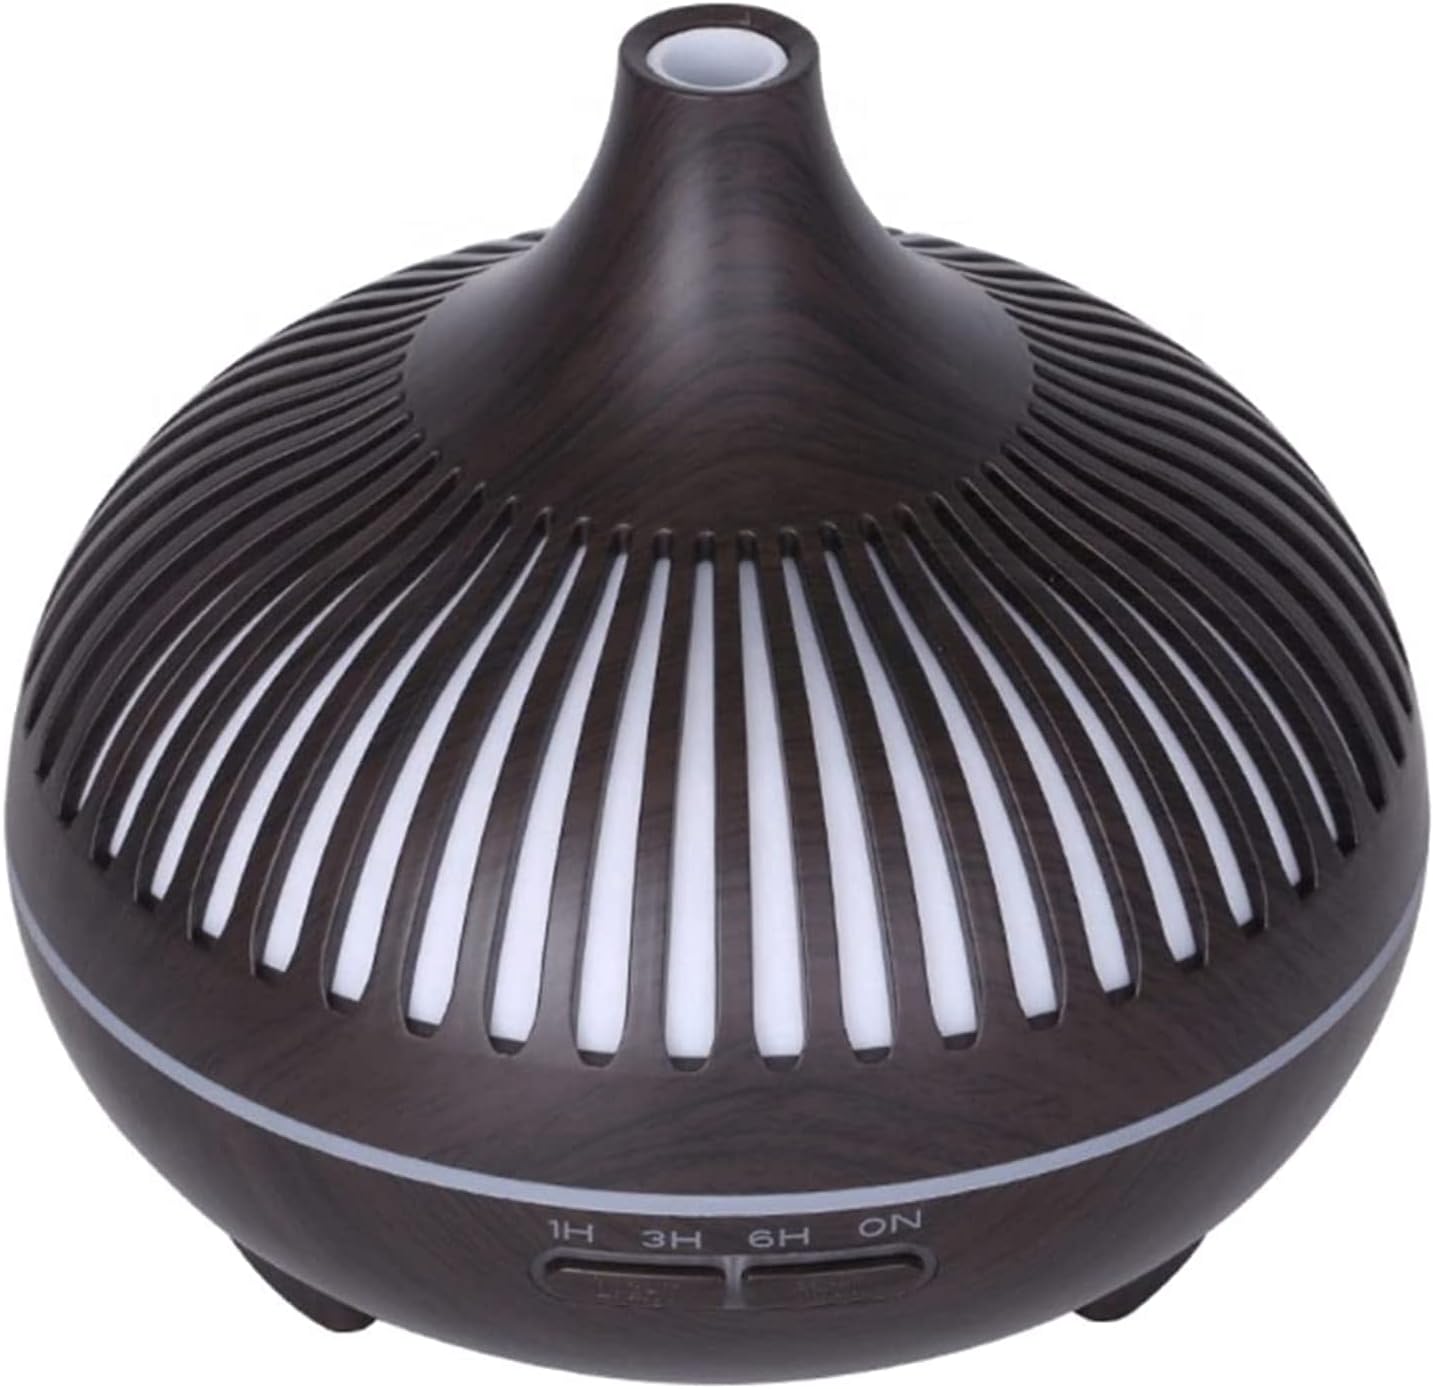 Wooden Ultrasonic Electric Air Humidifier- Black